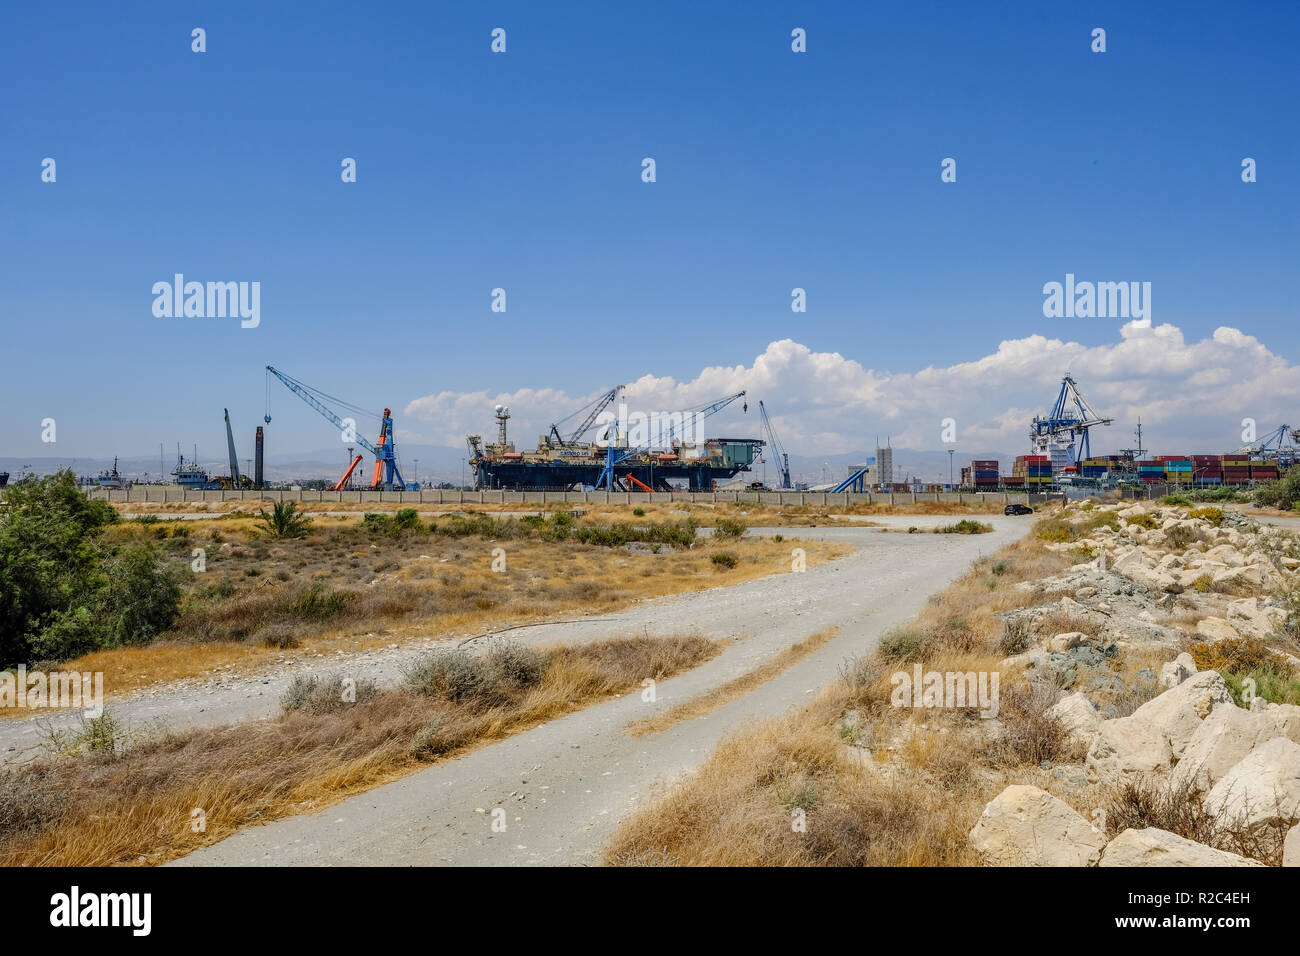 Limassol, Cyprus - June 23, 2018: Castoro Sei, a semi-submersible pipe laying vessel docked in Limassol at the port.  Shot taken on a bright blue sky  Stock Photo